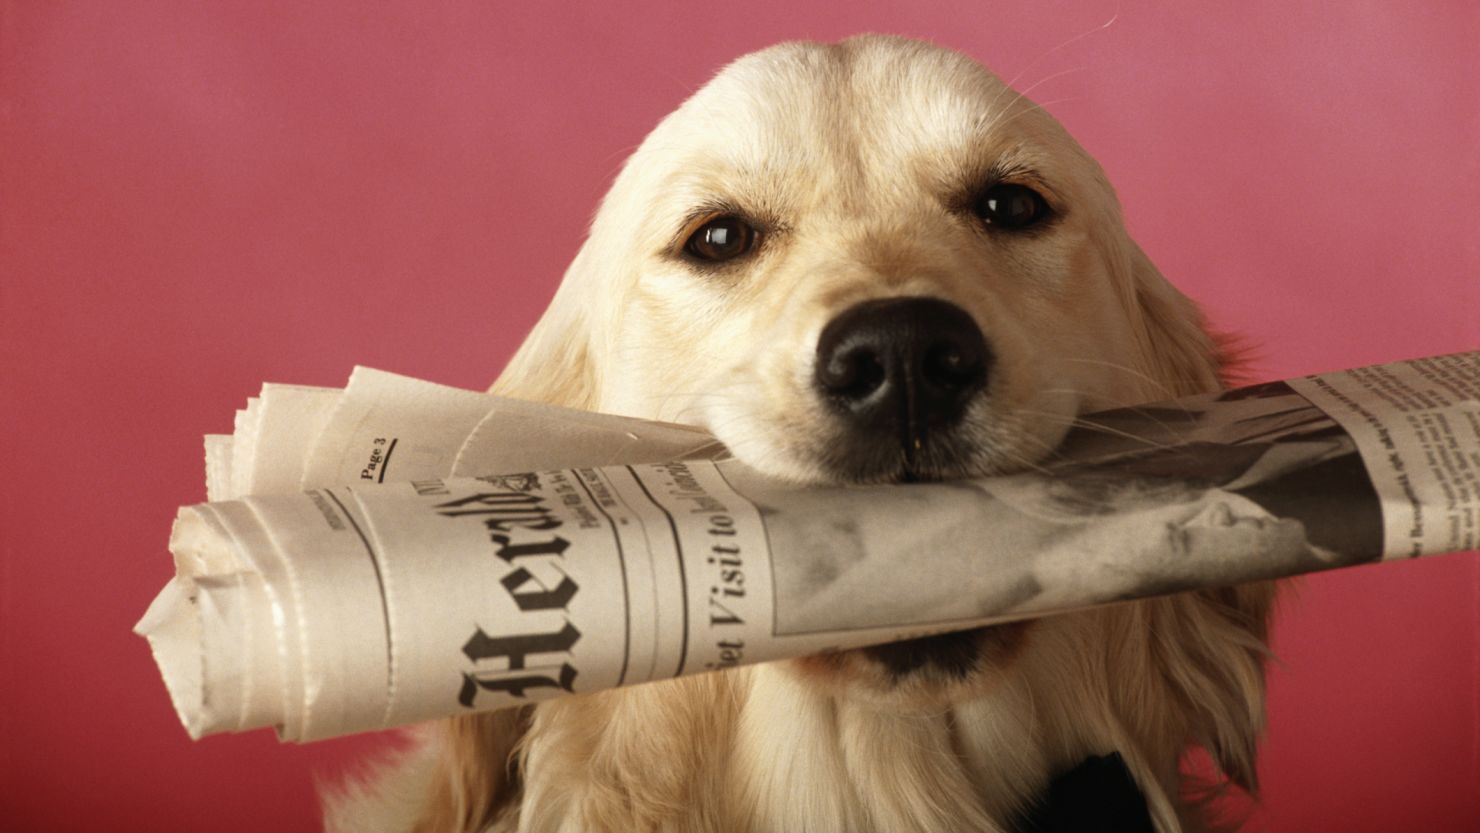 We can learn a lot from our pets, especially when they make headlines.